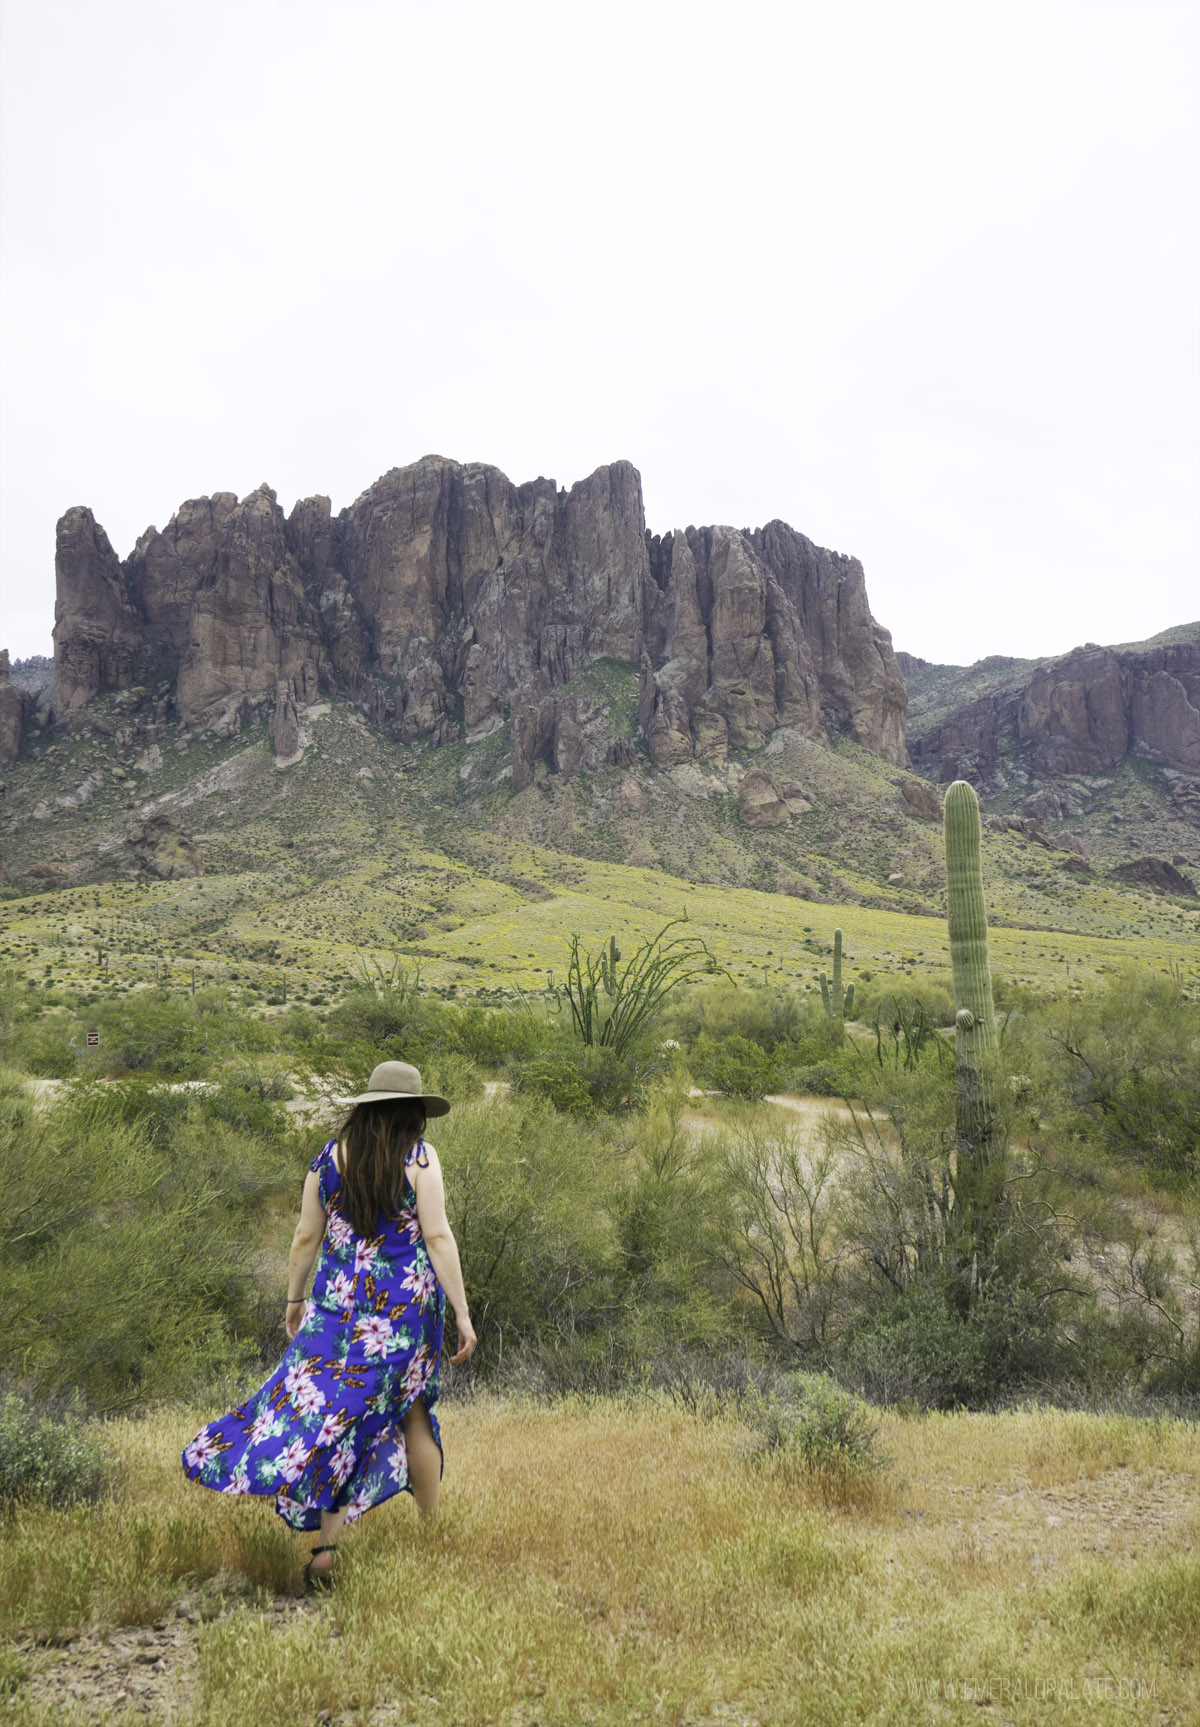 woman in a dress walking in grass with Superstition Mountains and cactus in the background